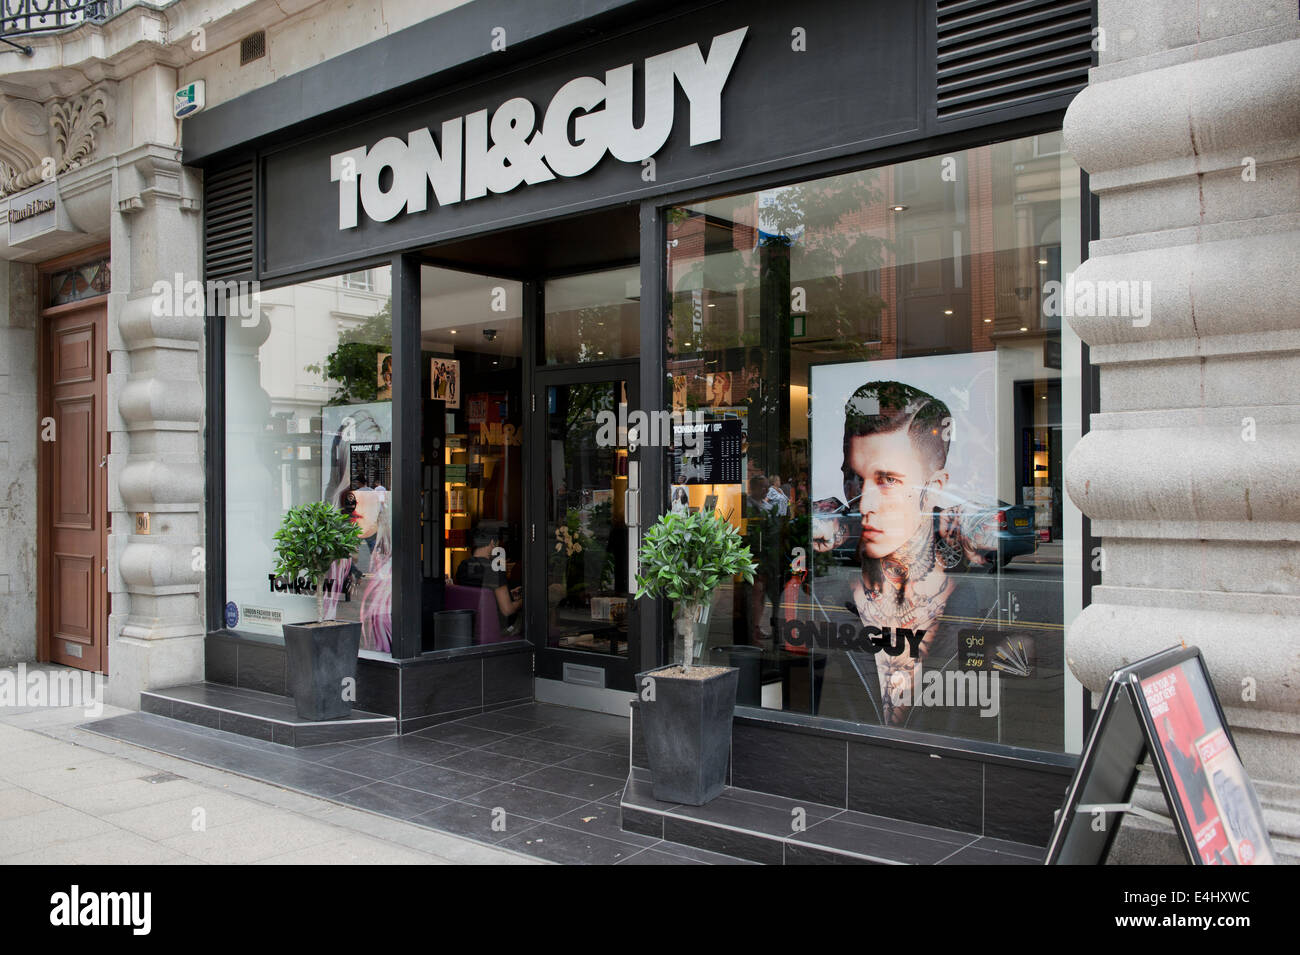 The shop storefront of a branch of Toni & Guy hairdressers on Deansgate in Manchester, UK. Stock Photo